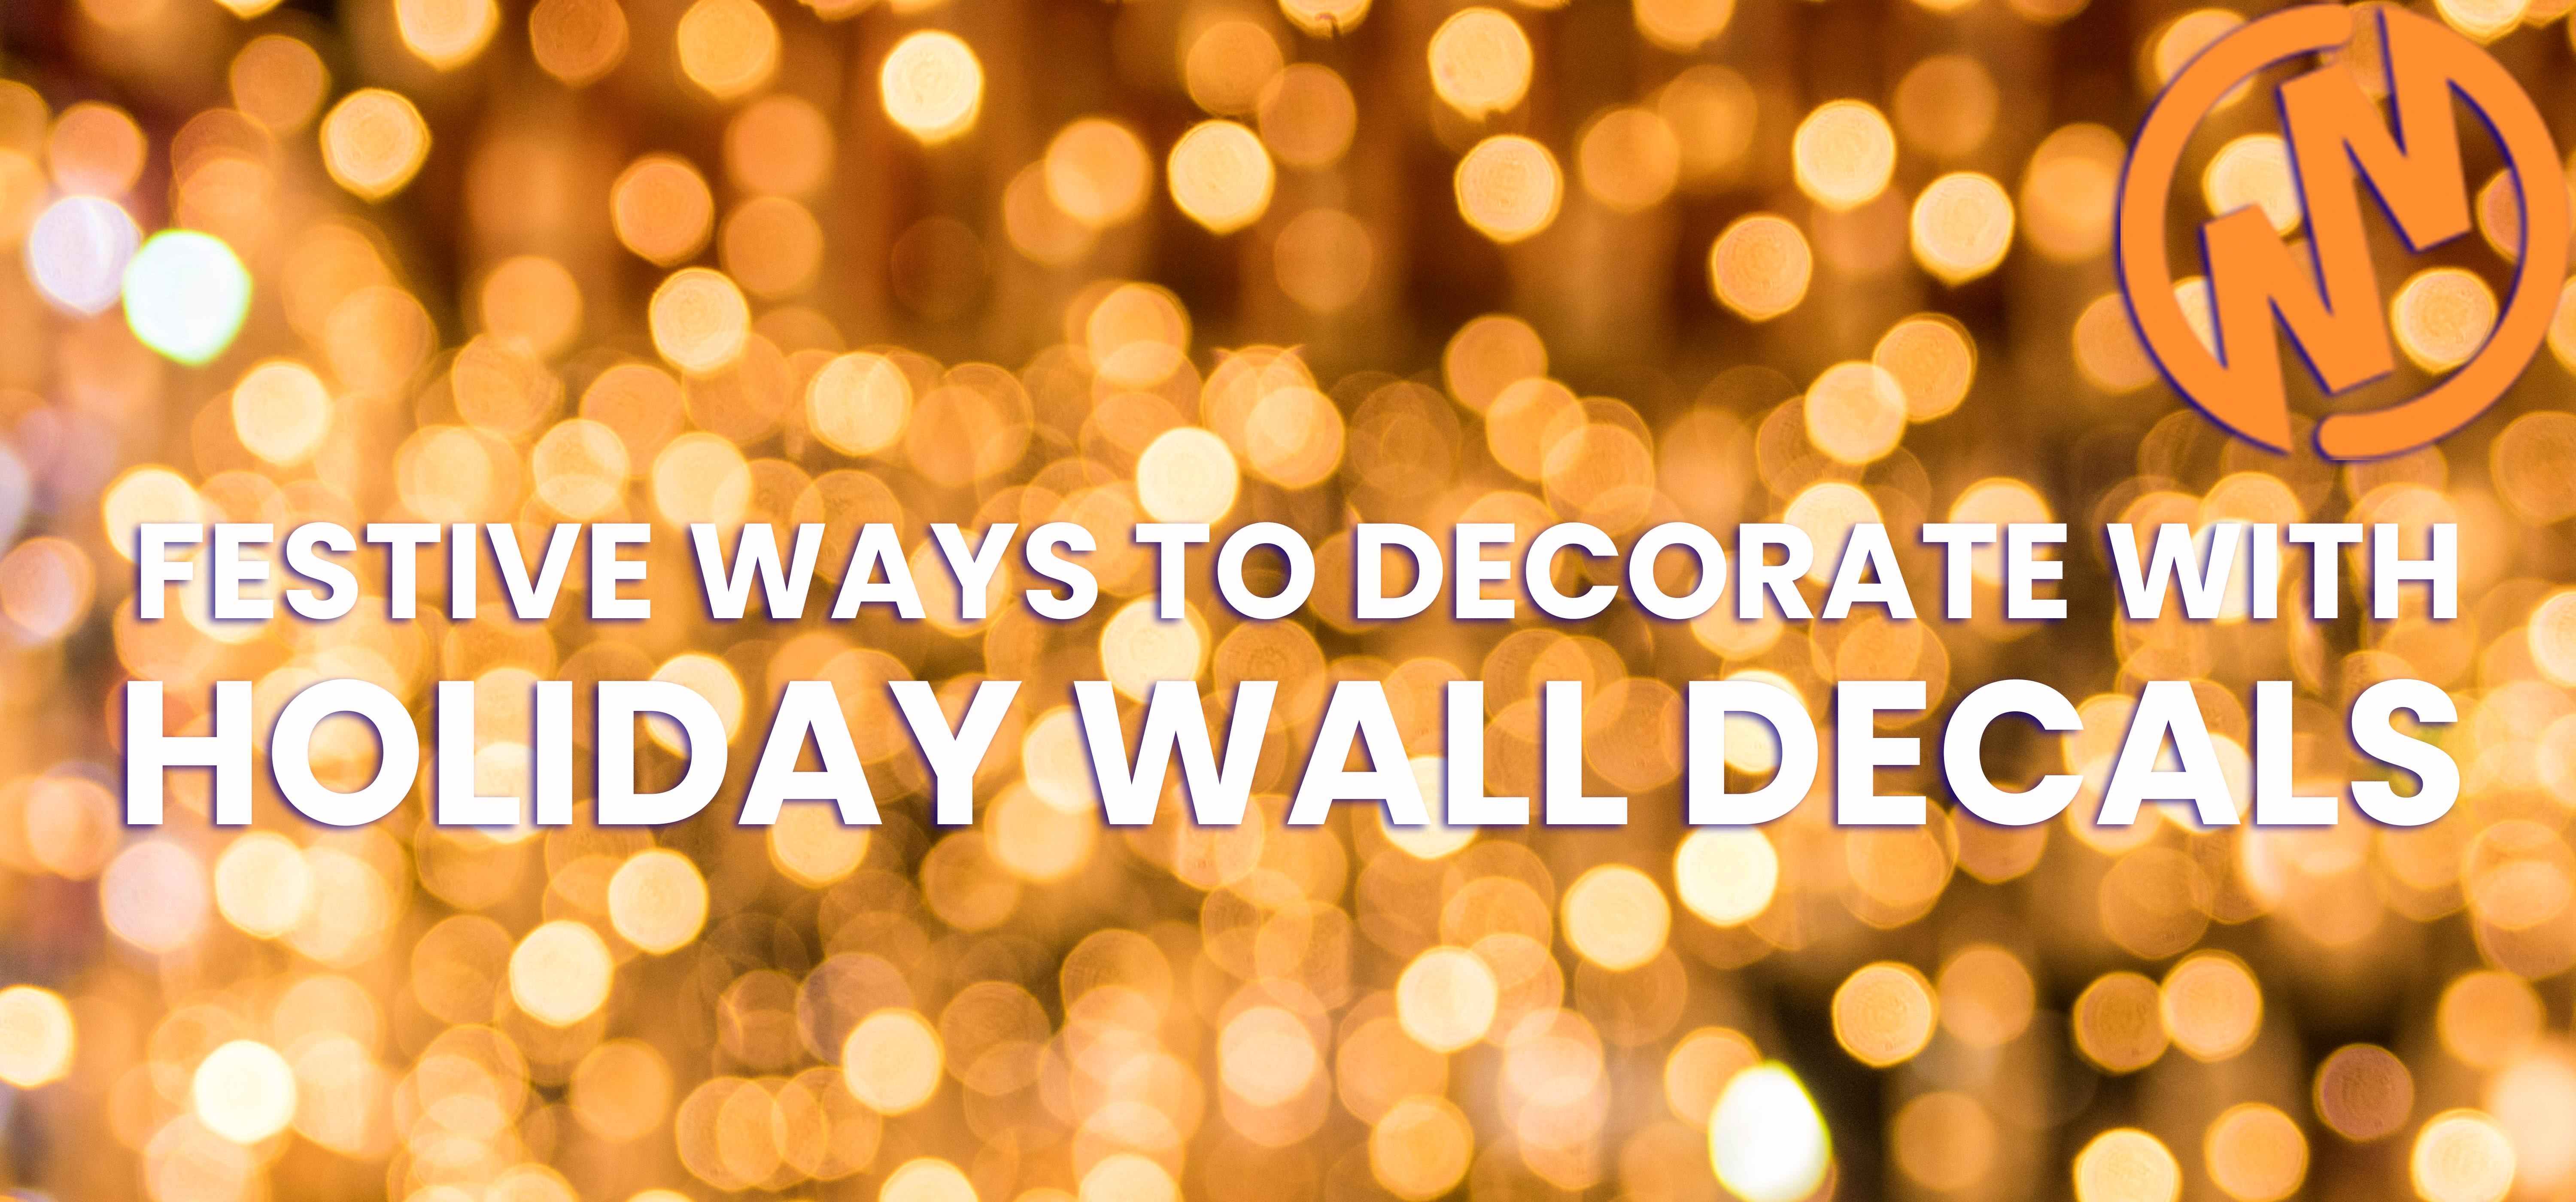 10 Festive Ways to Decorate With Holiday Wall Decal Packages